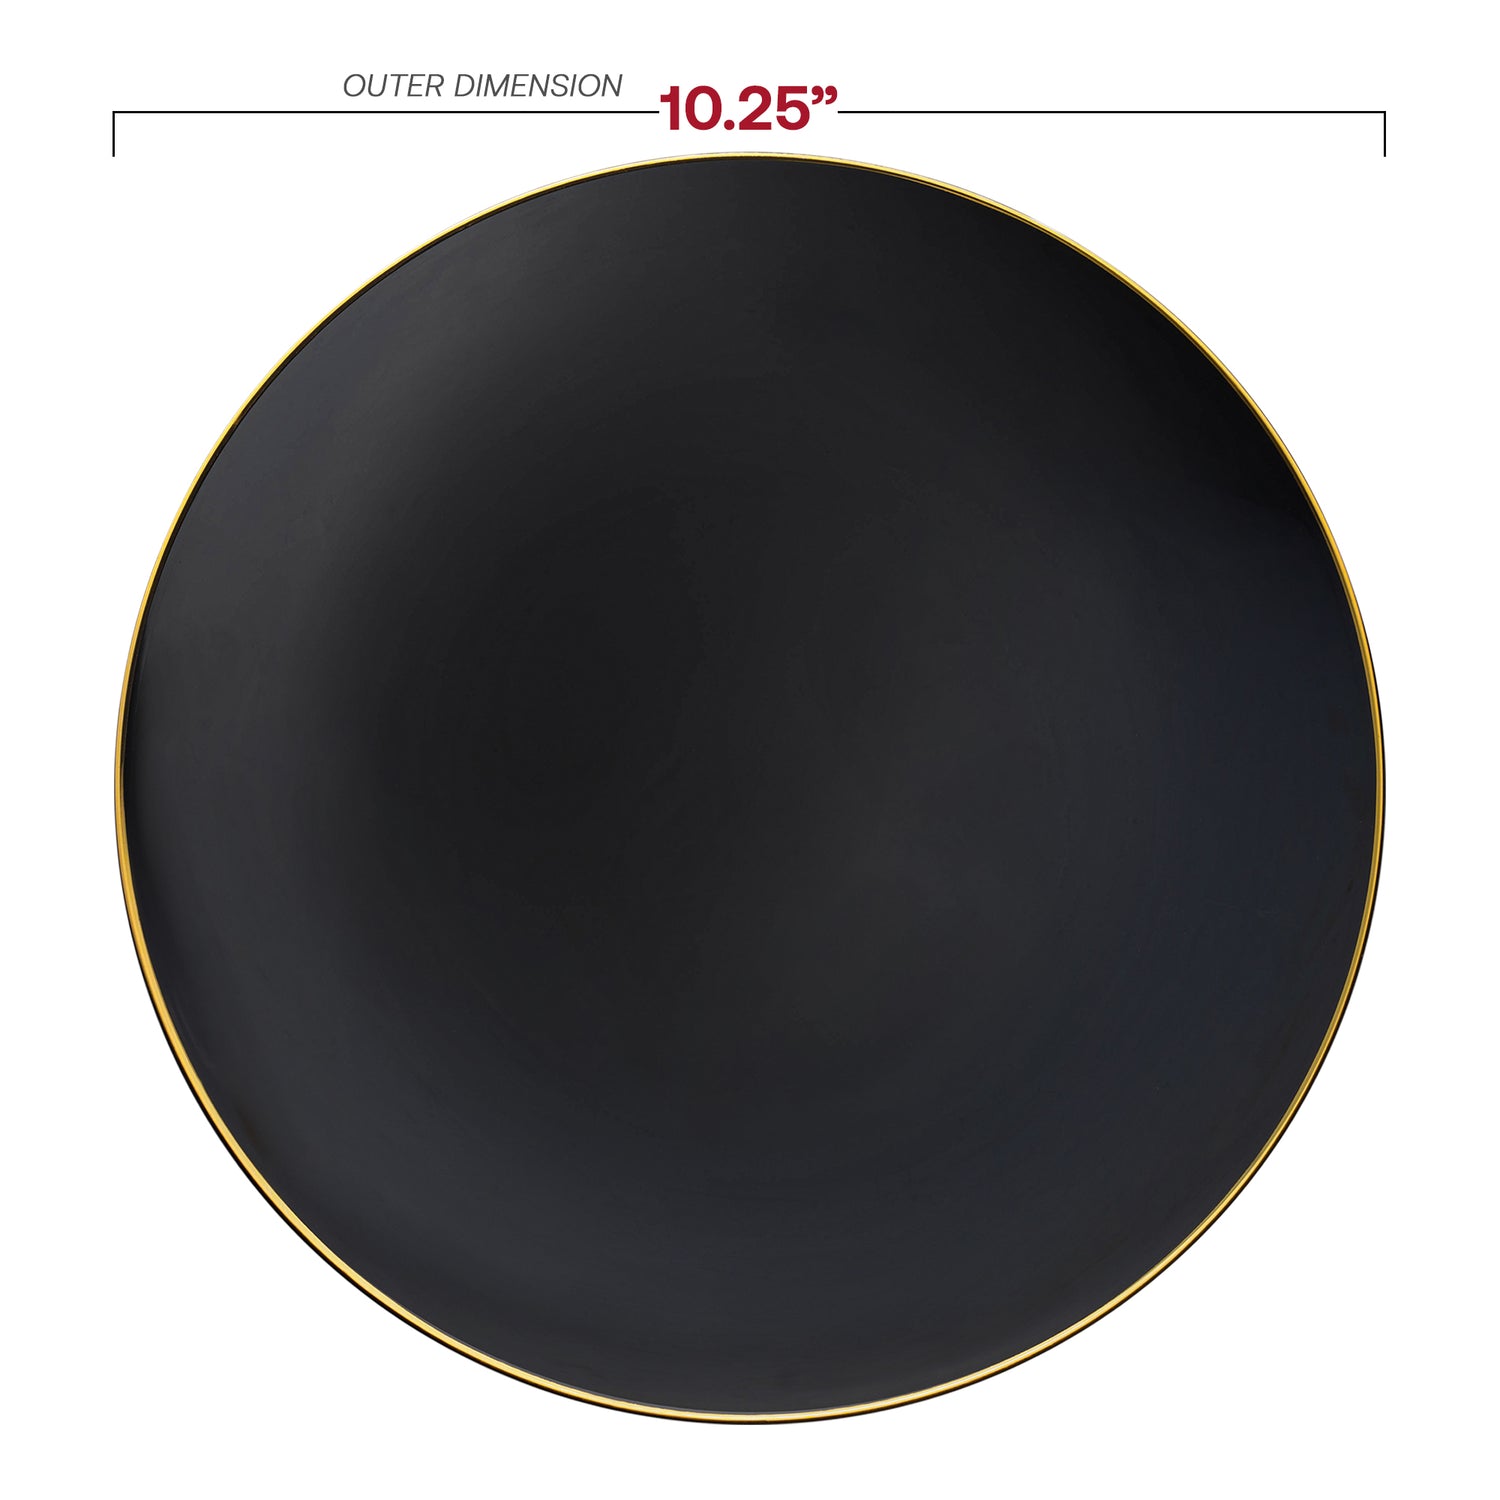 Black with Gold Rim Organic Round Disposable Plastic Dinner Plates (10.25") Dimension | The Kaya Collection